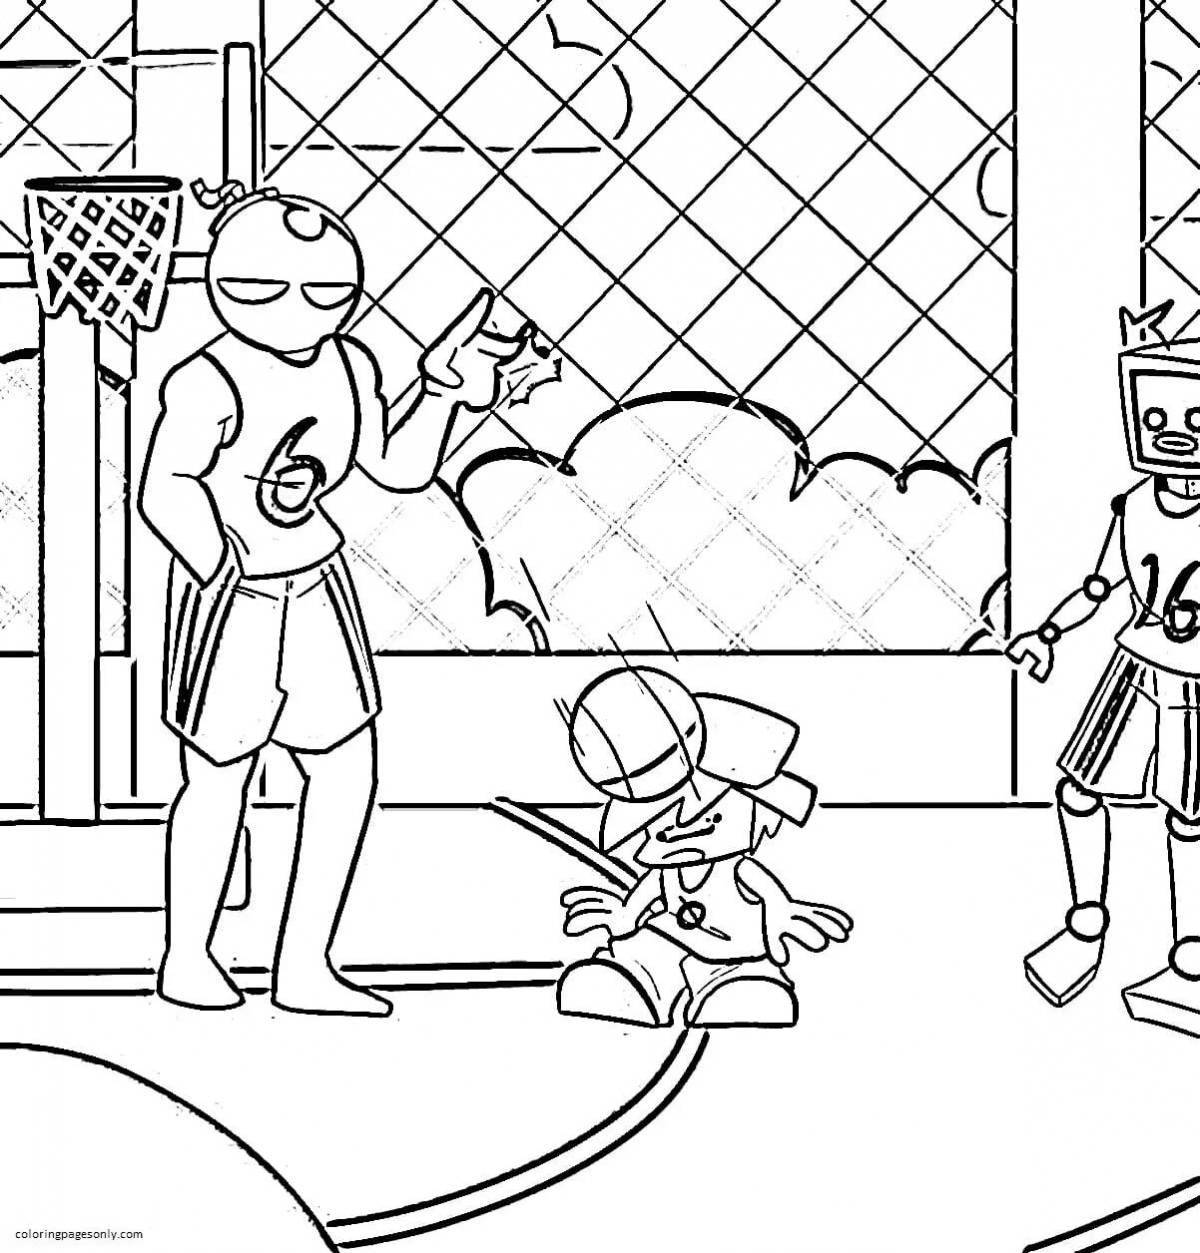 Colored Hudson coloring pages